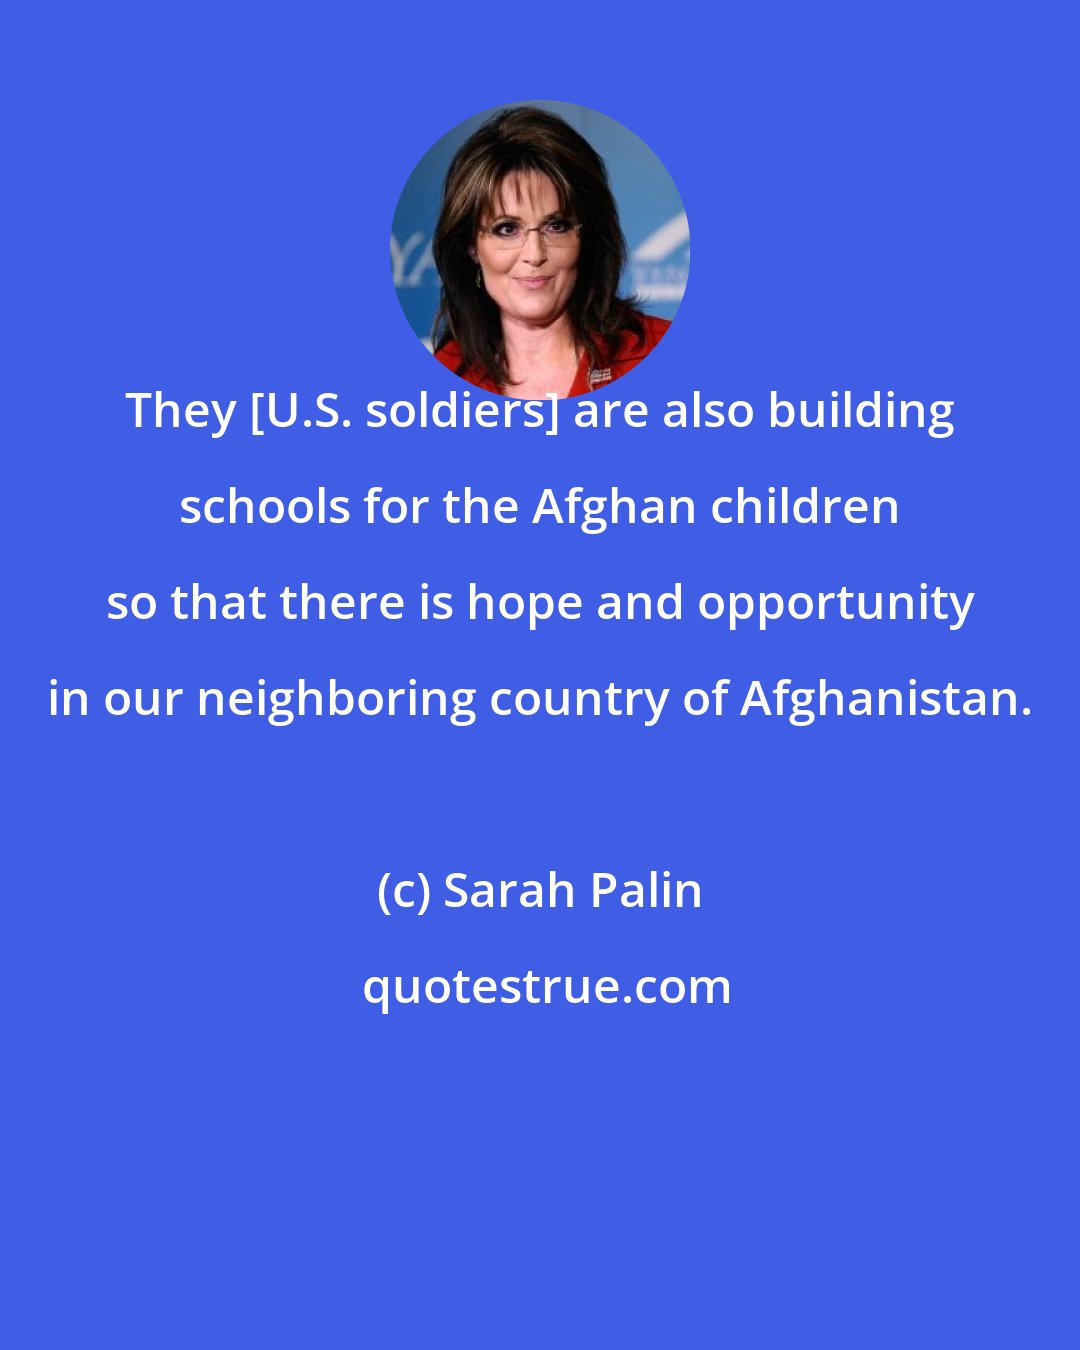 Sarah Palin: They [U.S. soldiers] are also building schools for the Afghan children so that there is hope and opportunity in our neighboring country of Afghanistan.